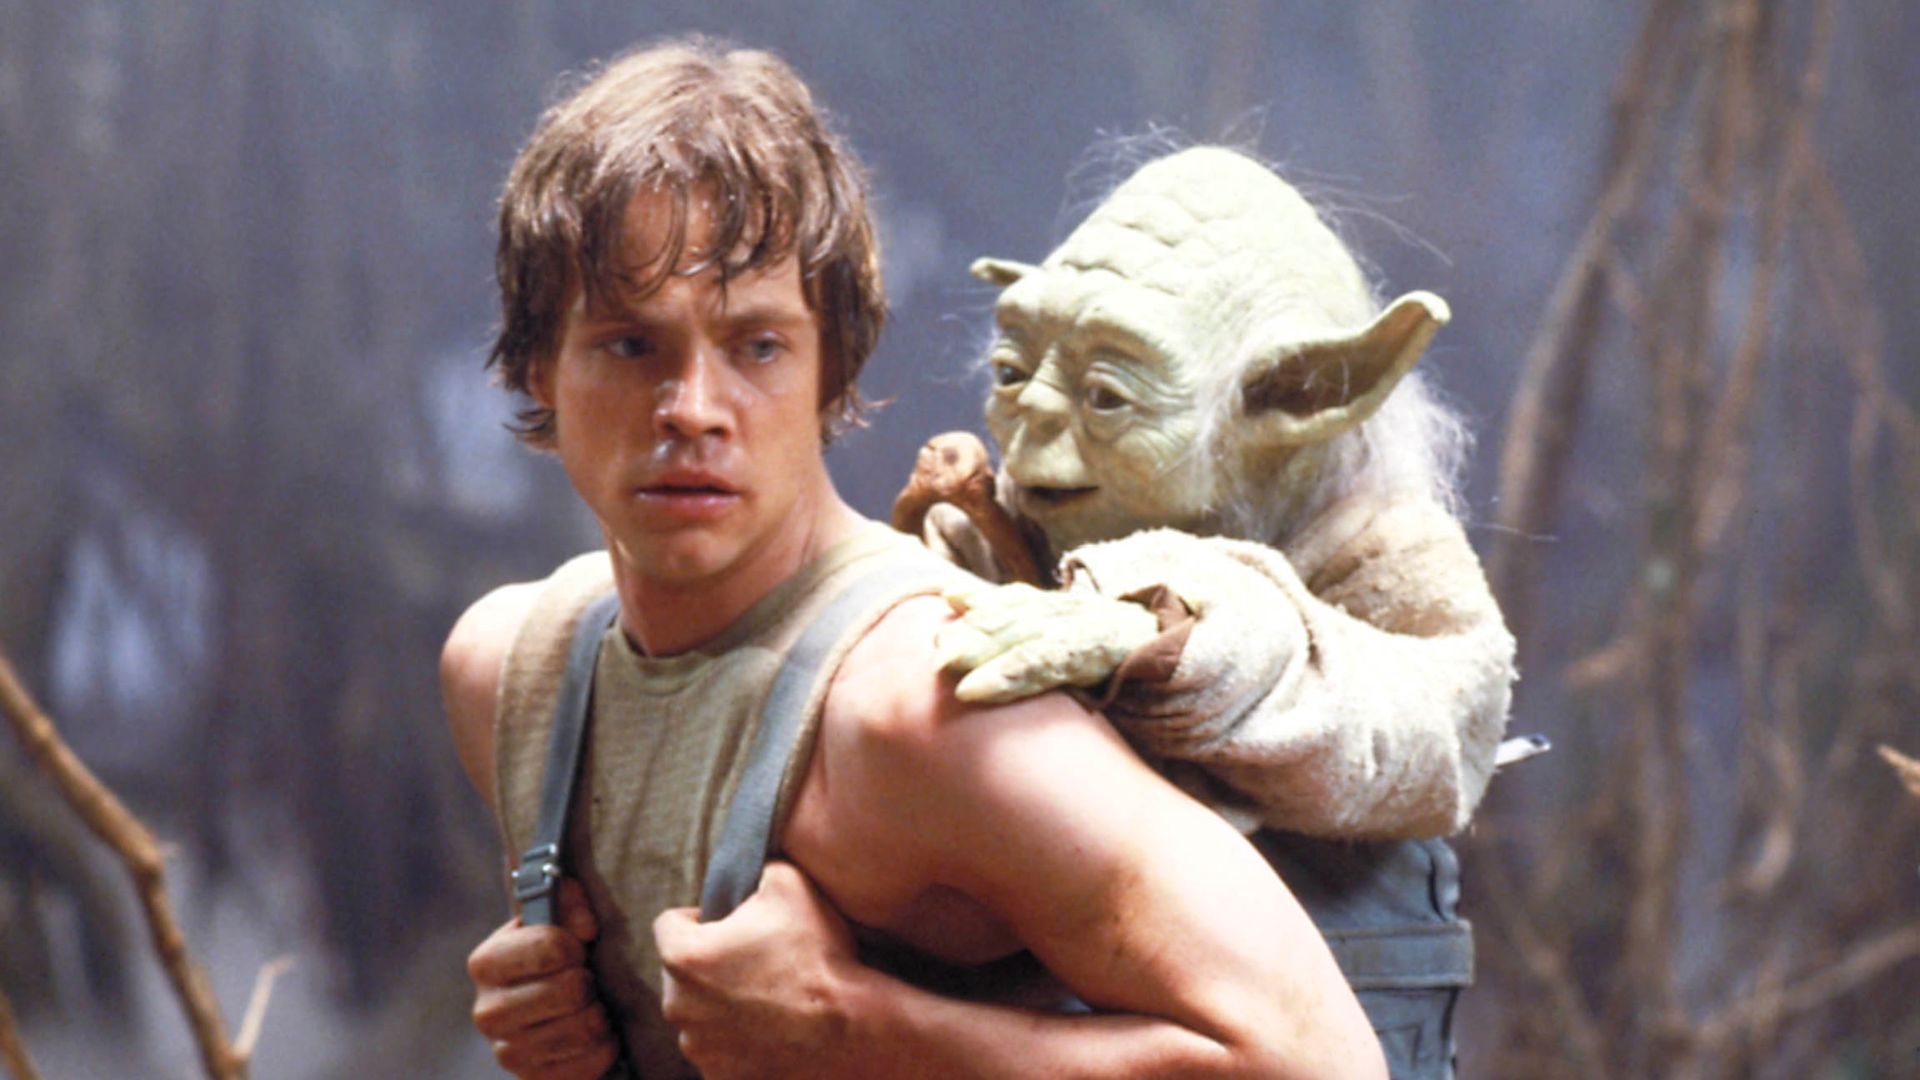 Mark Hamill reveals his unpopular Star Wars opinion about an “under appreciated” project